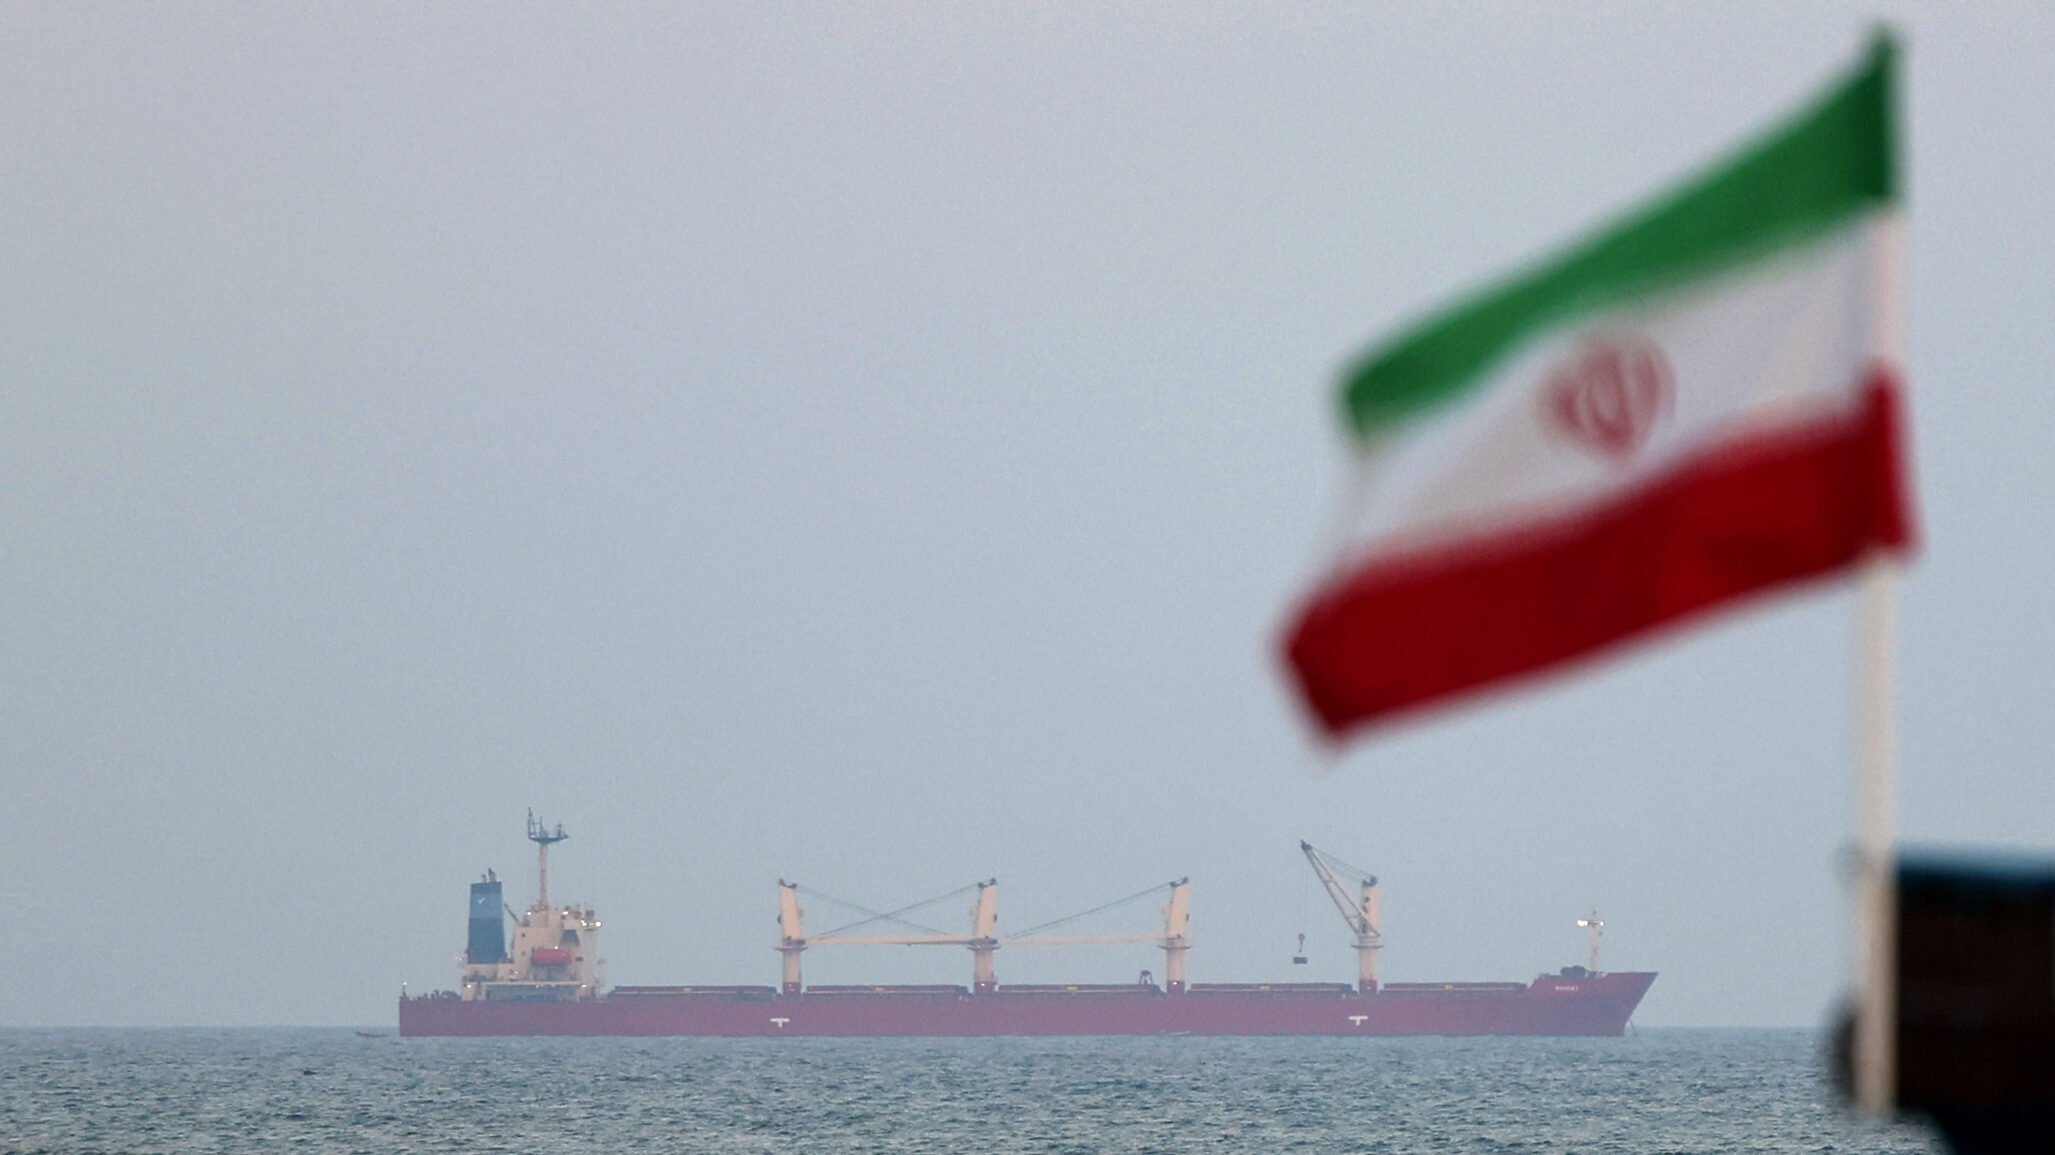 To counter Iran at sea, US must sell partners on doing more